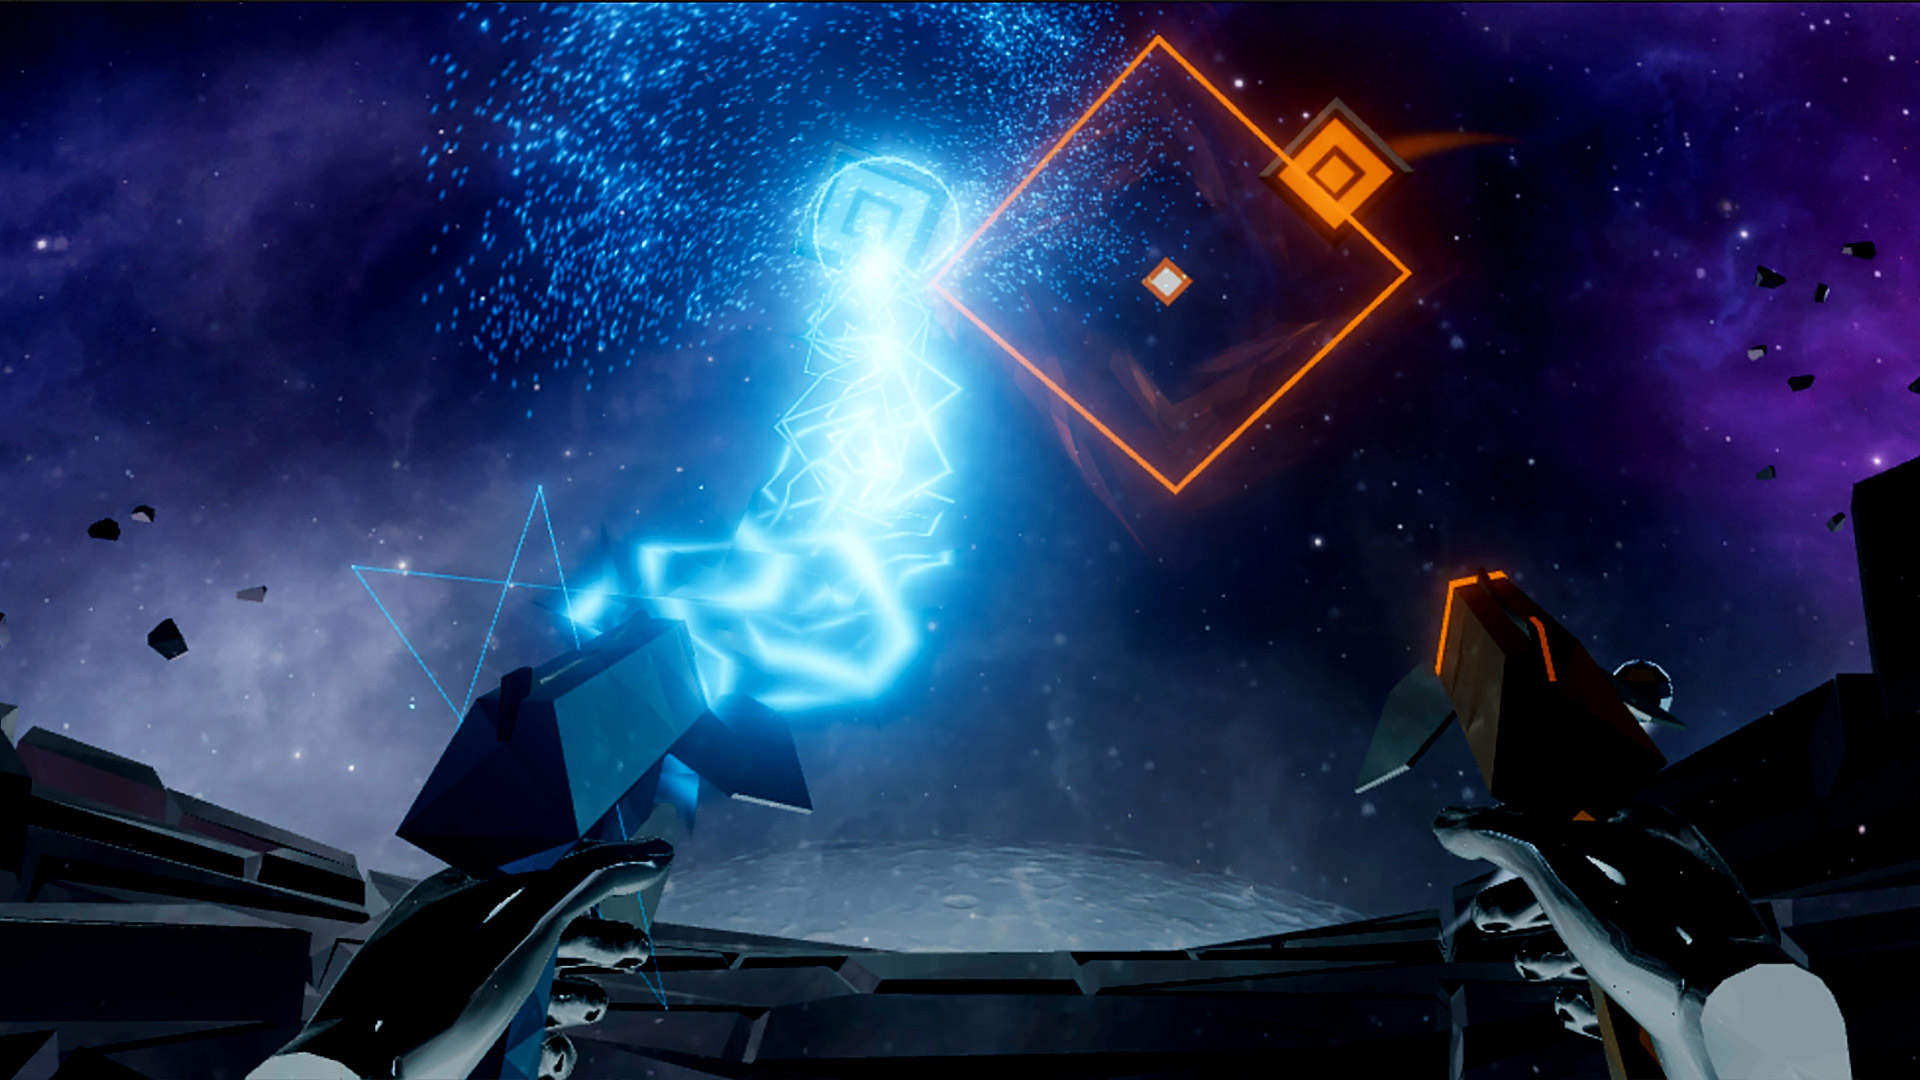 A New Rhythm Shooter Is Making Waves In The World Of PlayStation VR, Harmonix IS Bringing Audica To The Console This Fall